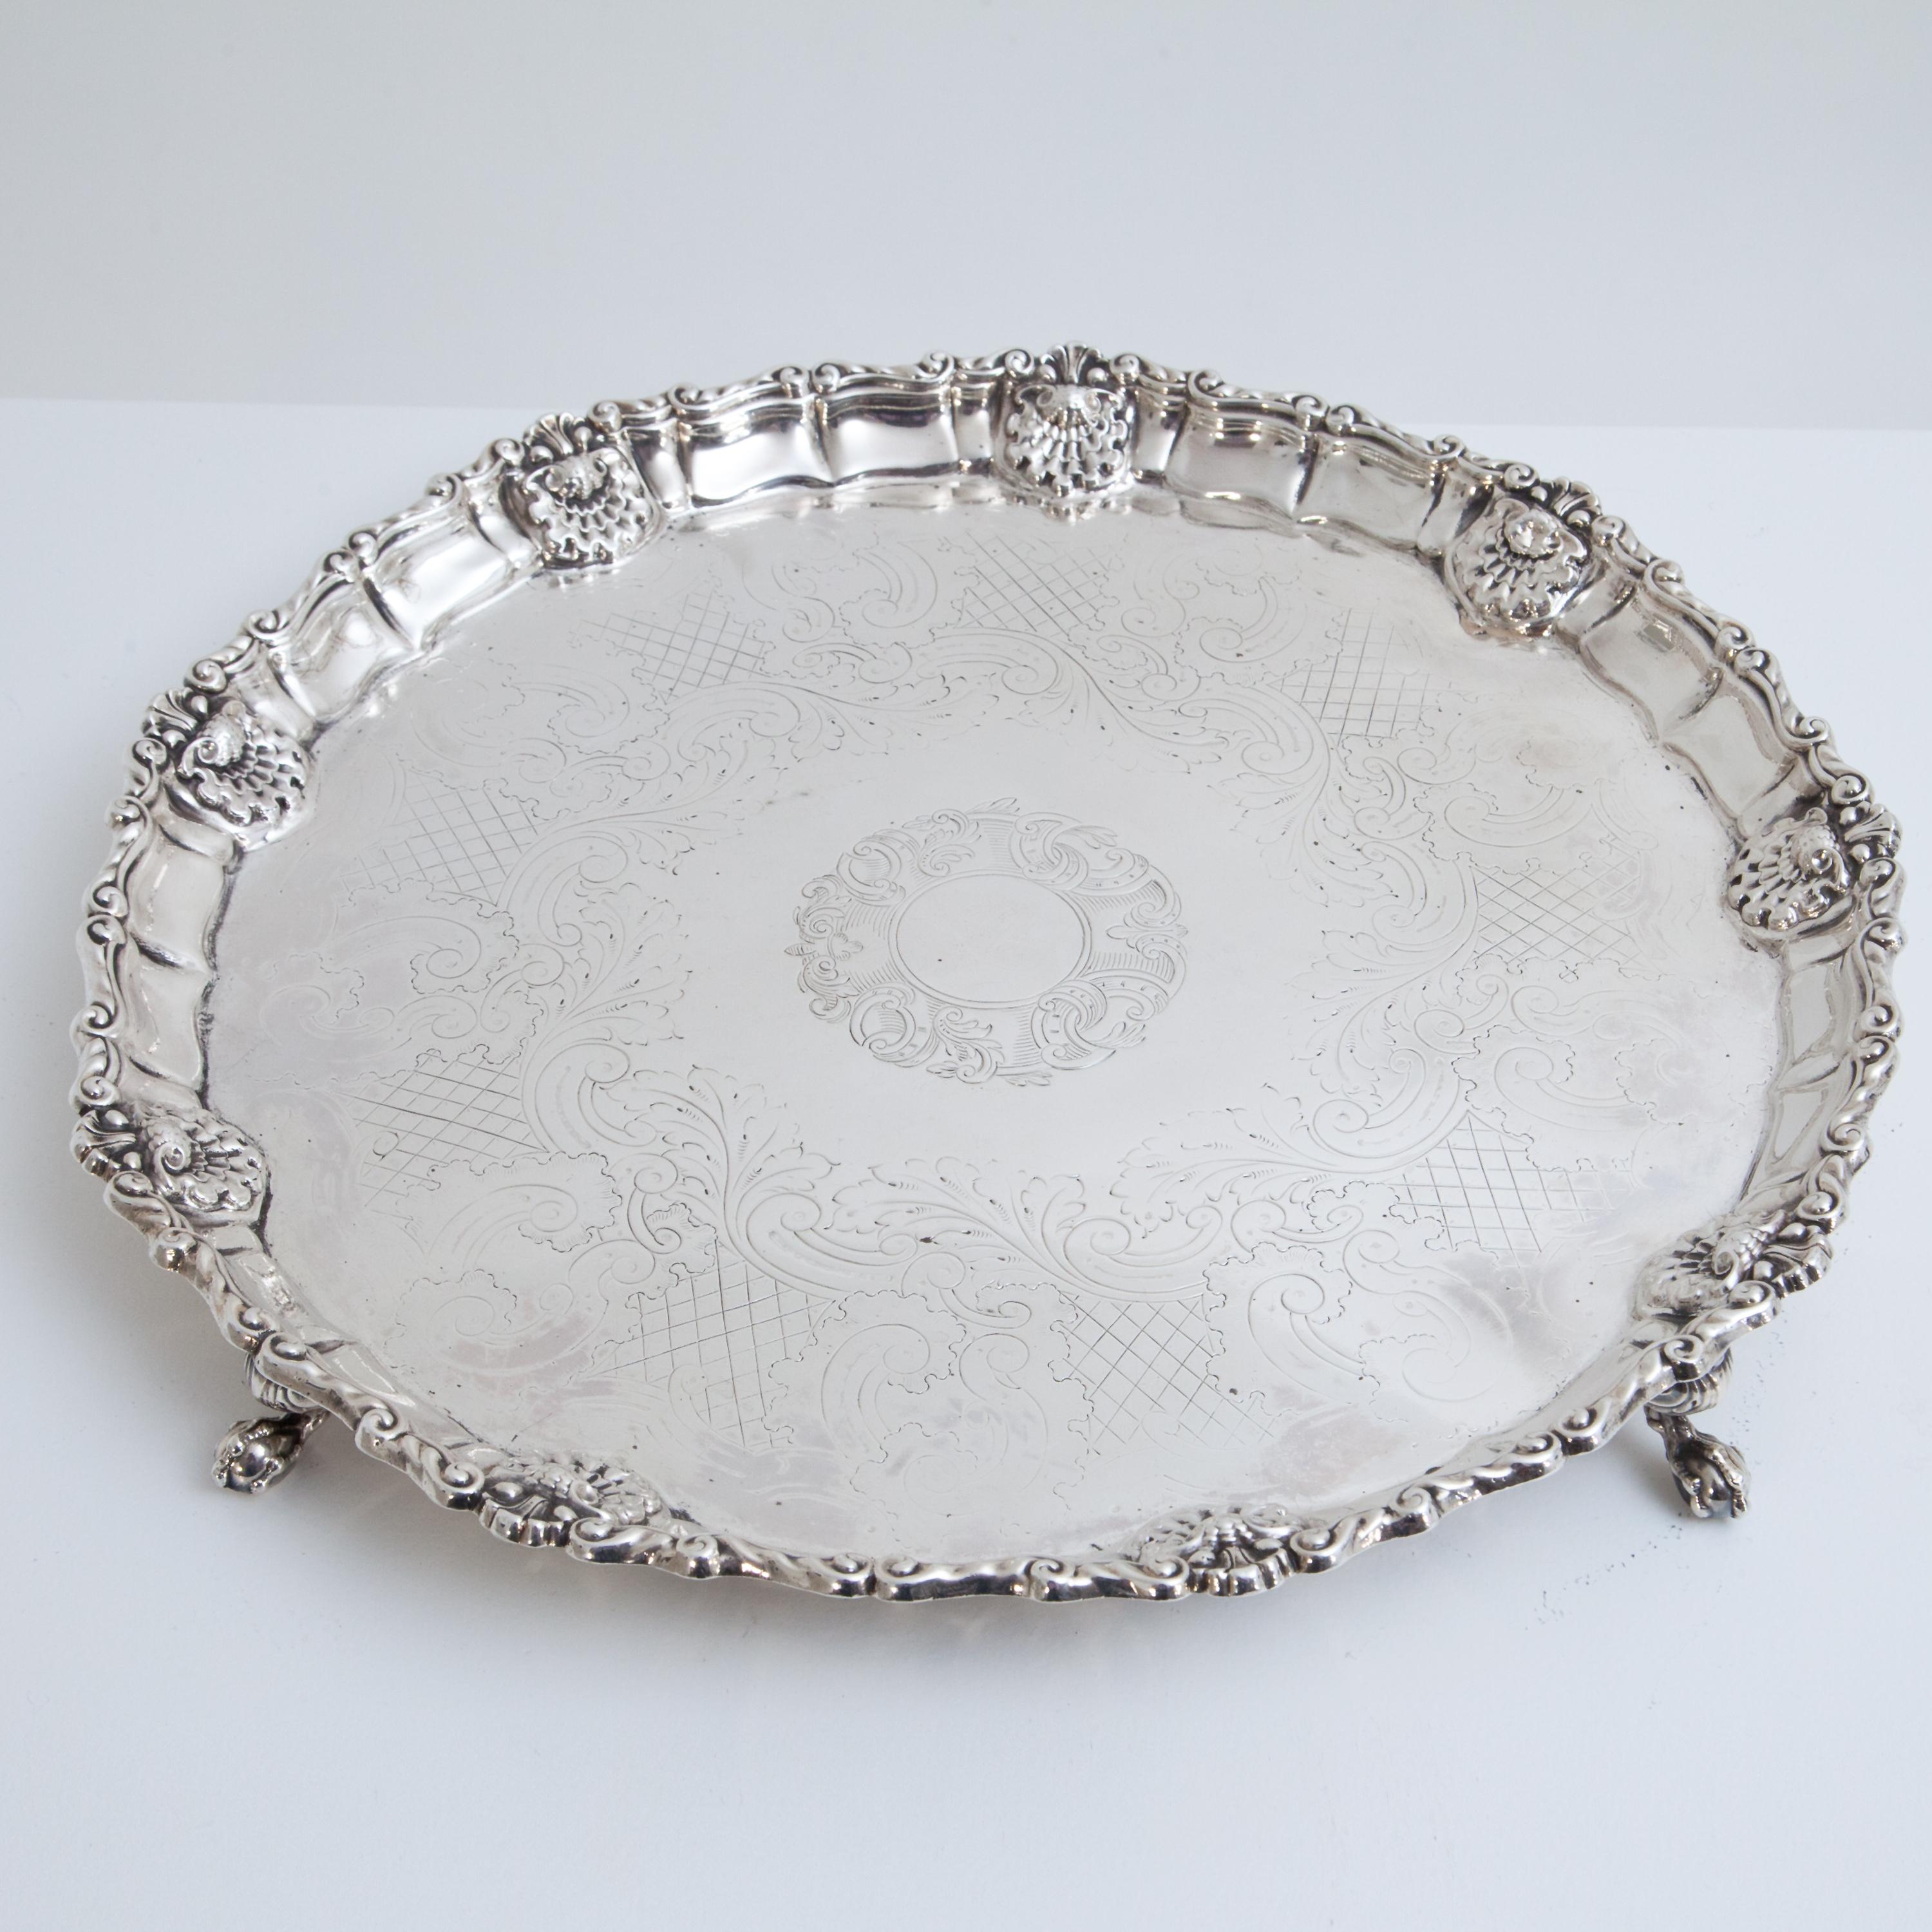 Large silver salver (1460g) with shell decoration on the rim and worn master mark, possibly Benjamin Smith.
 